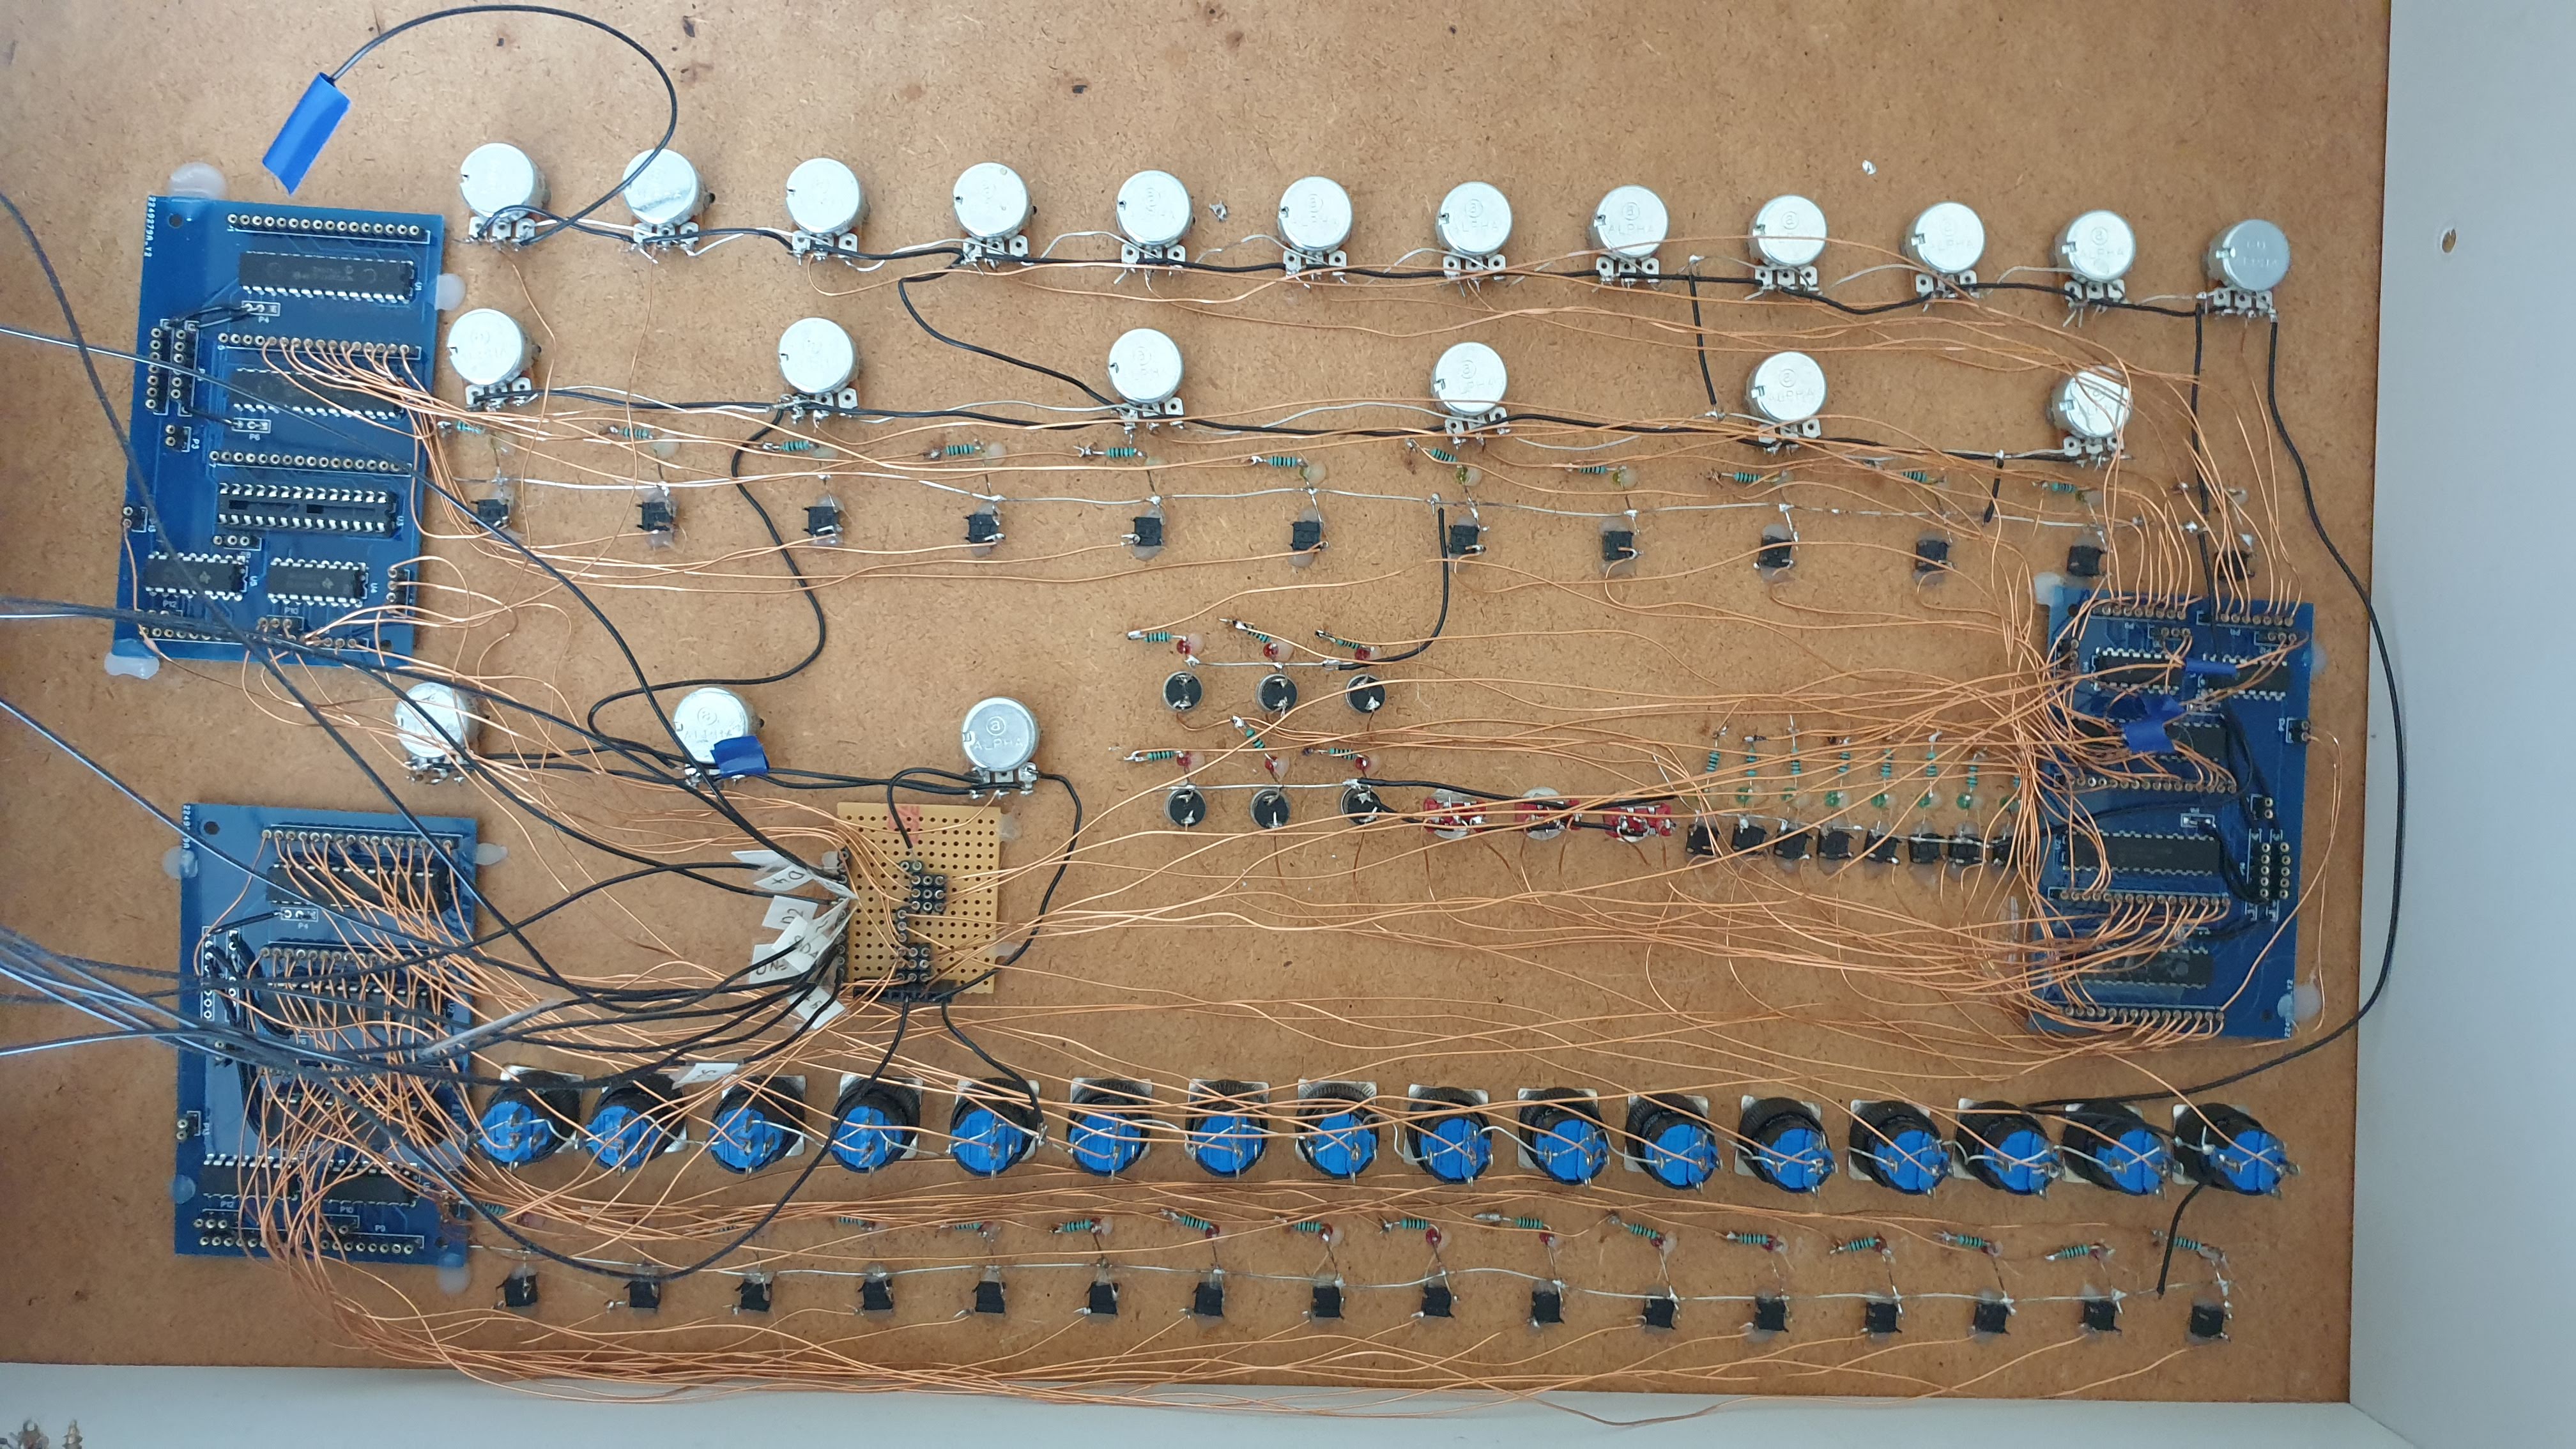 Picture of panel rear with wiring and soldered components